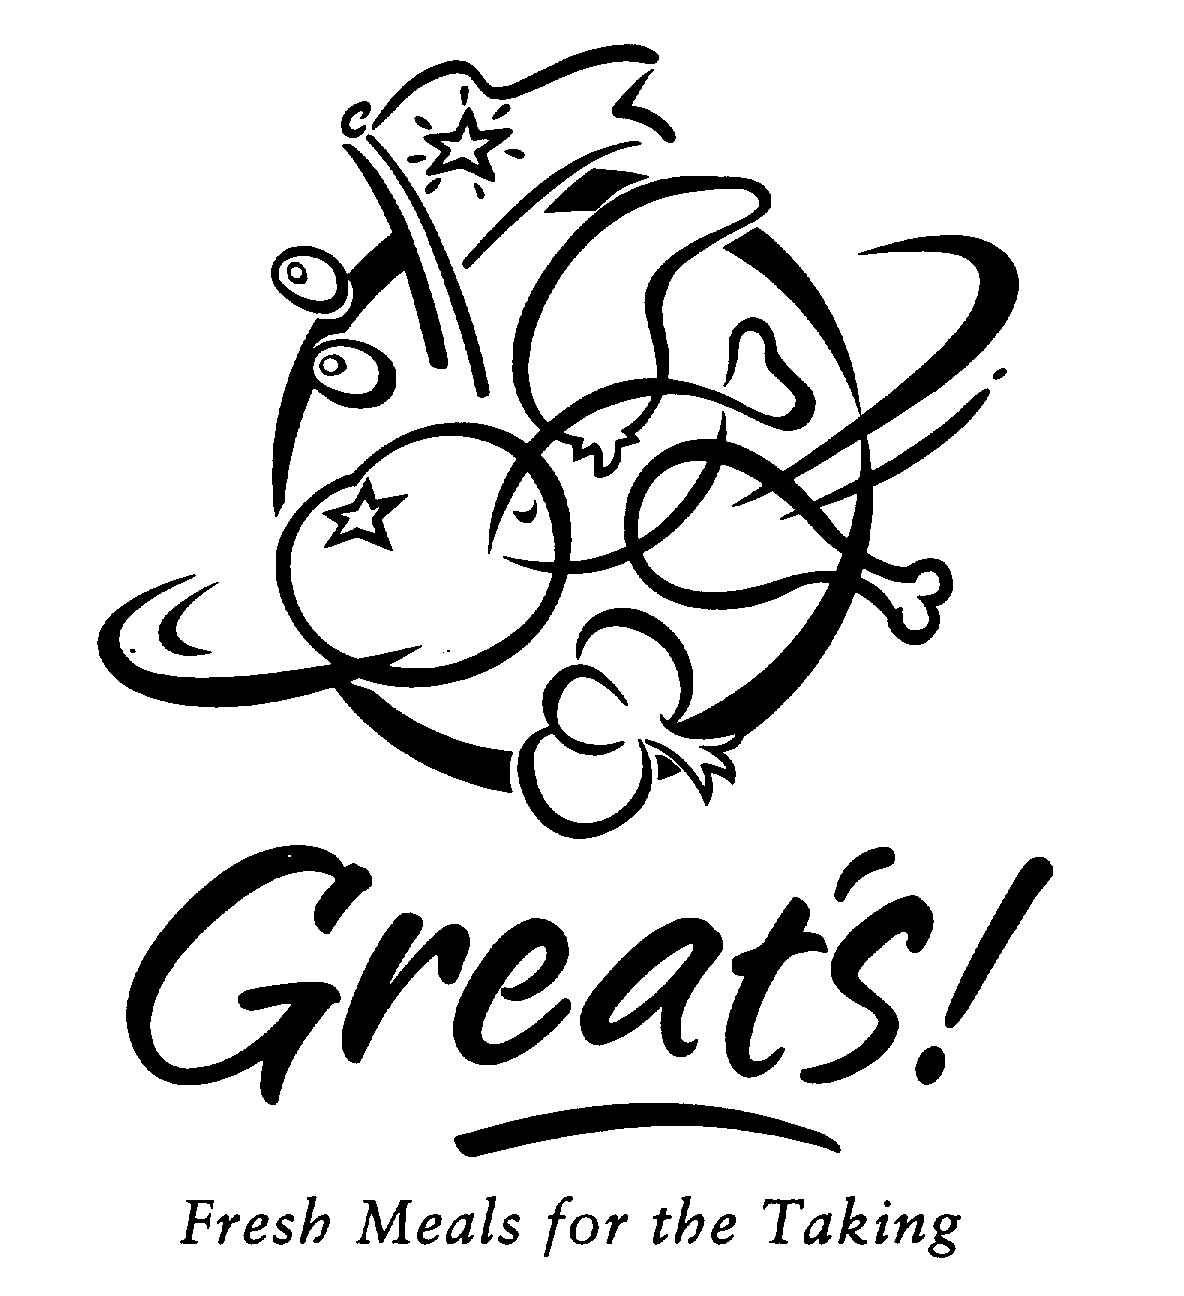  GREAT'S! FRESH MEALS FOR THE TAKING